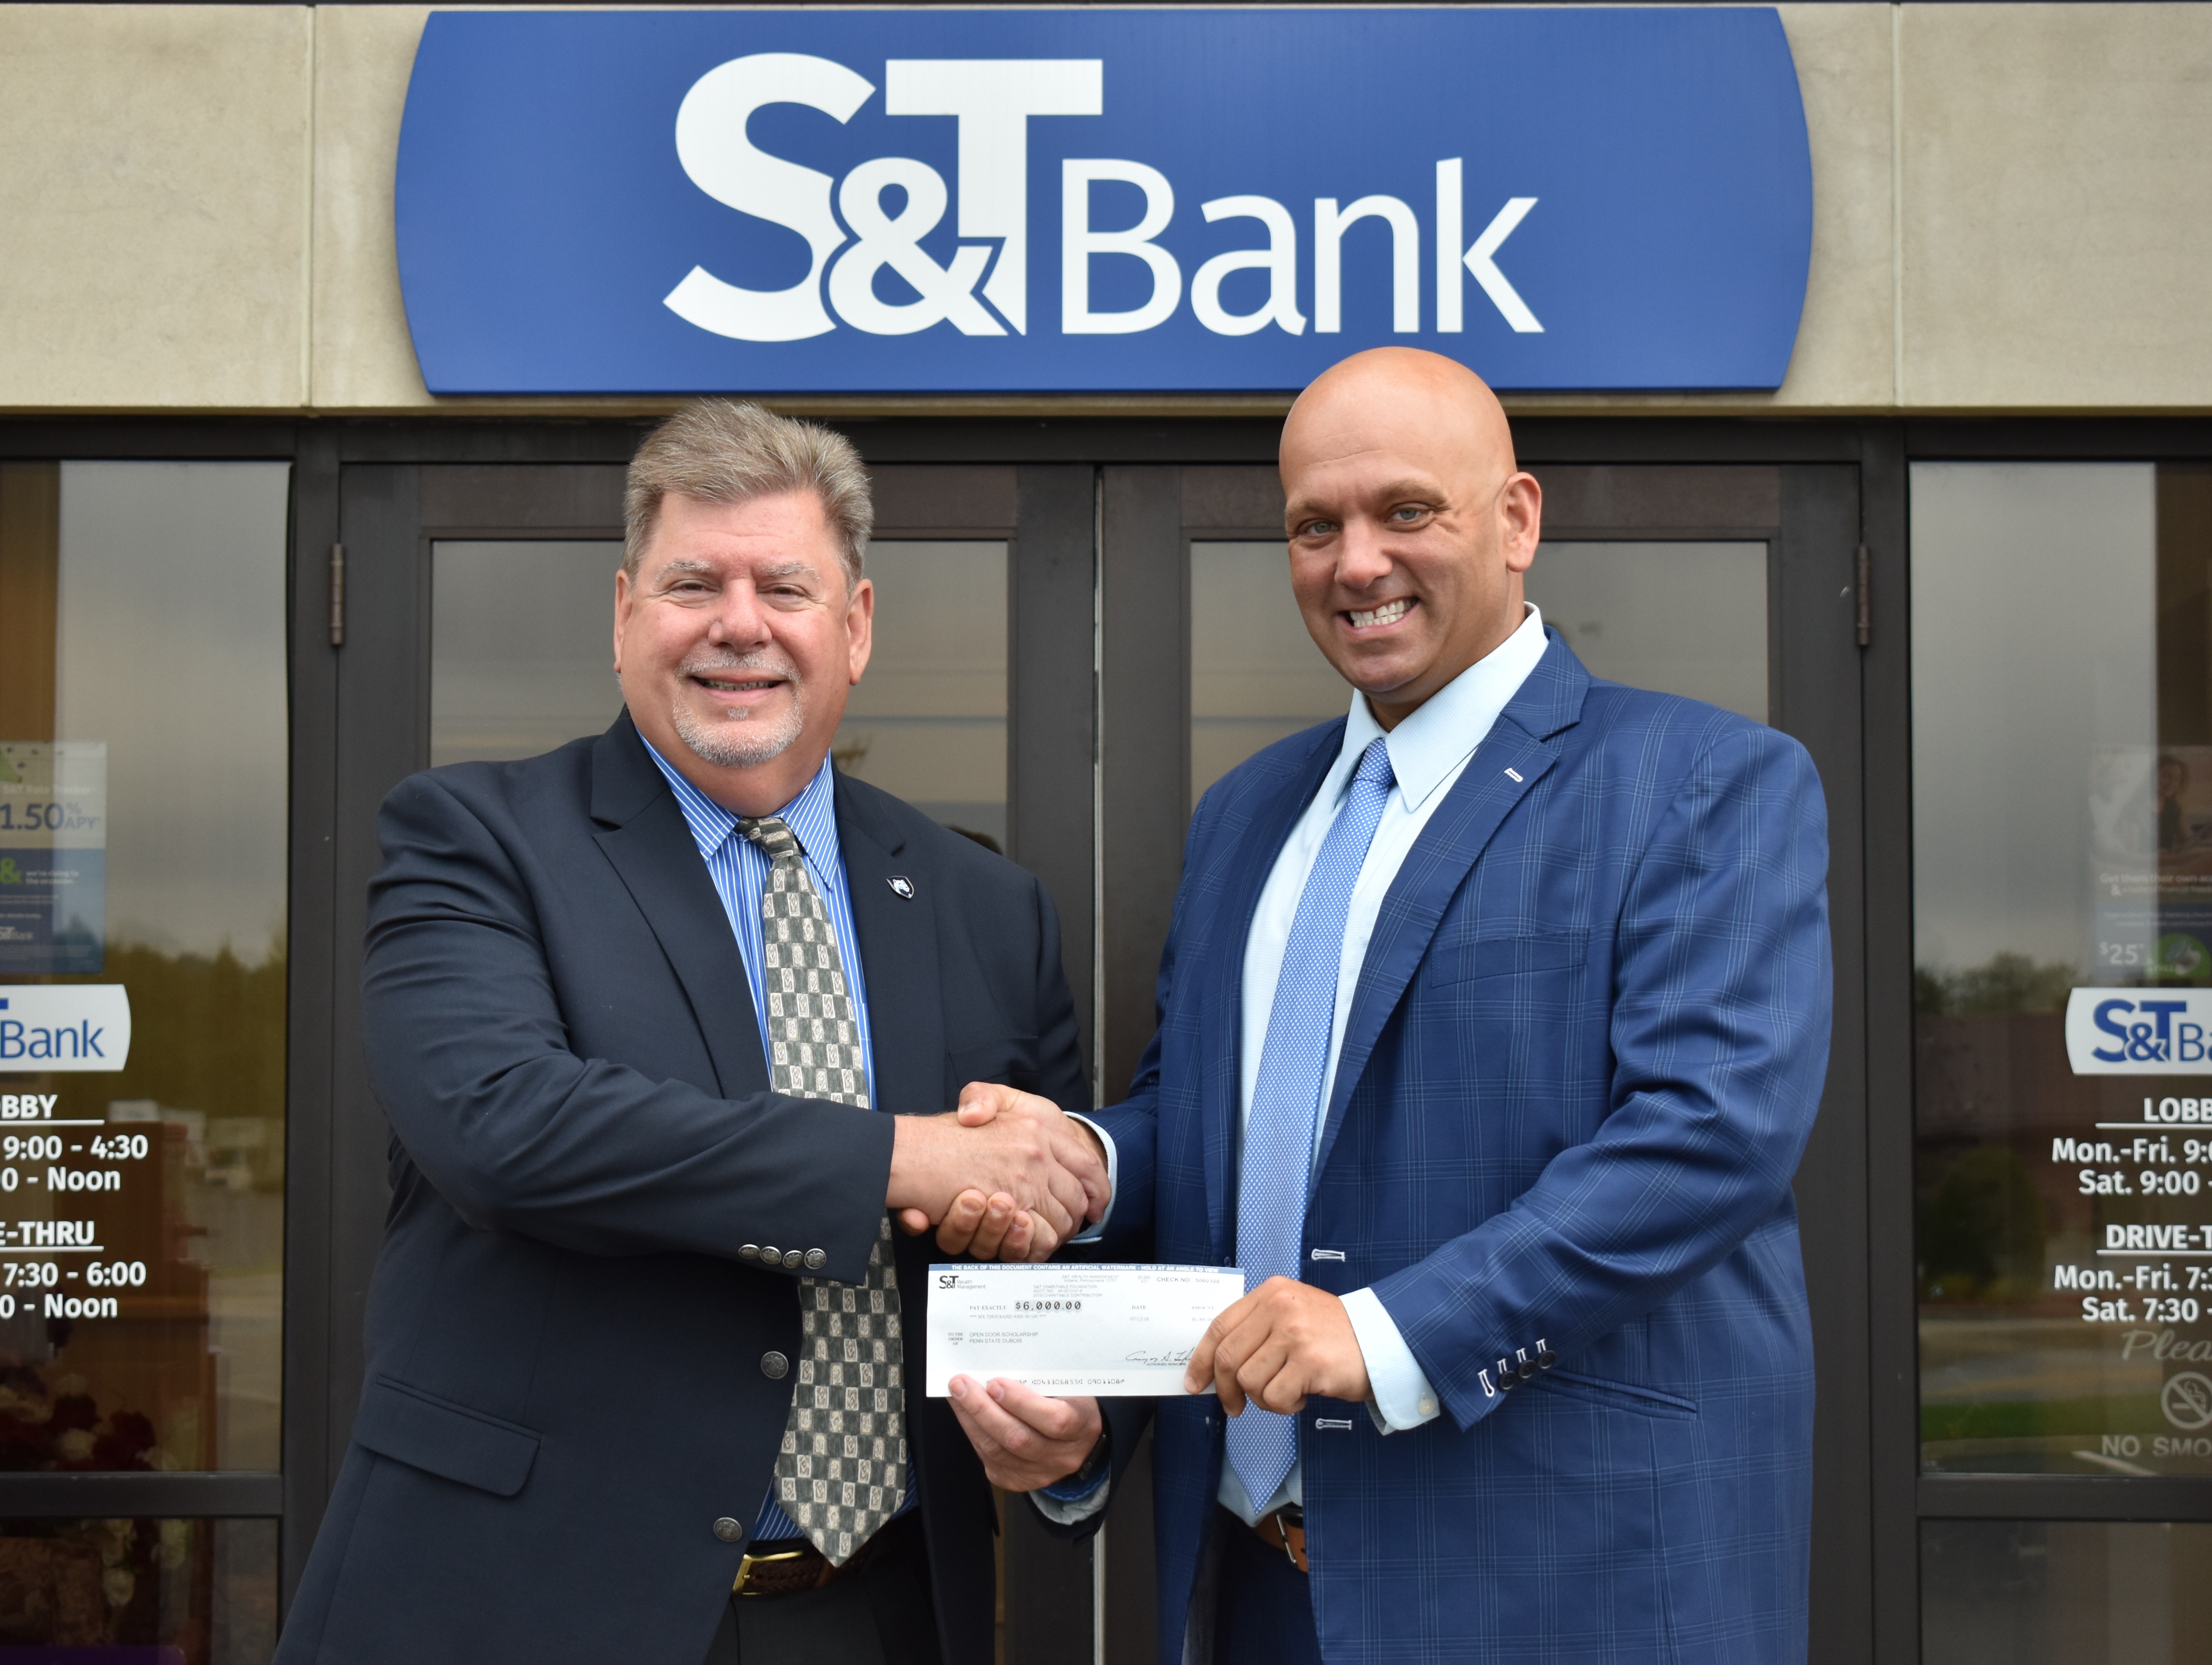 Chancellor M. Scott McBride, left, accepts a $30,000 check from S&T Bank’s Senior Vice President and Commercial Banker Daniel Baronick to establish the S&T Bank Open Doors Scholarship. (Provided photo)